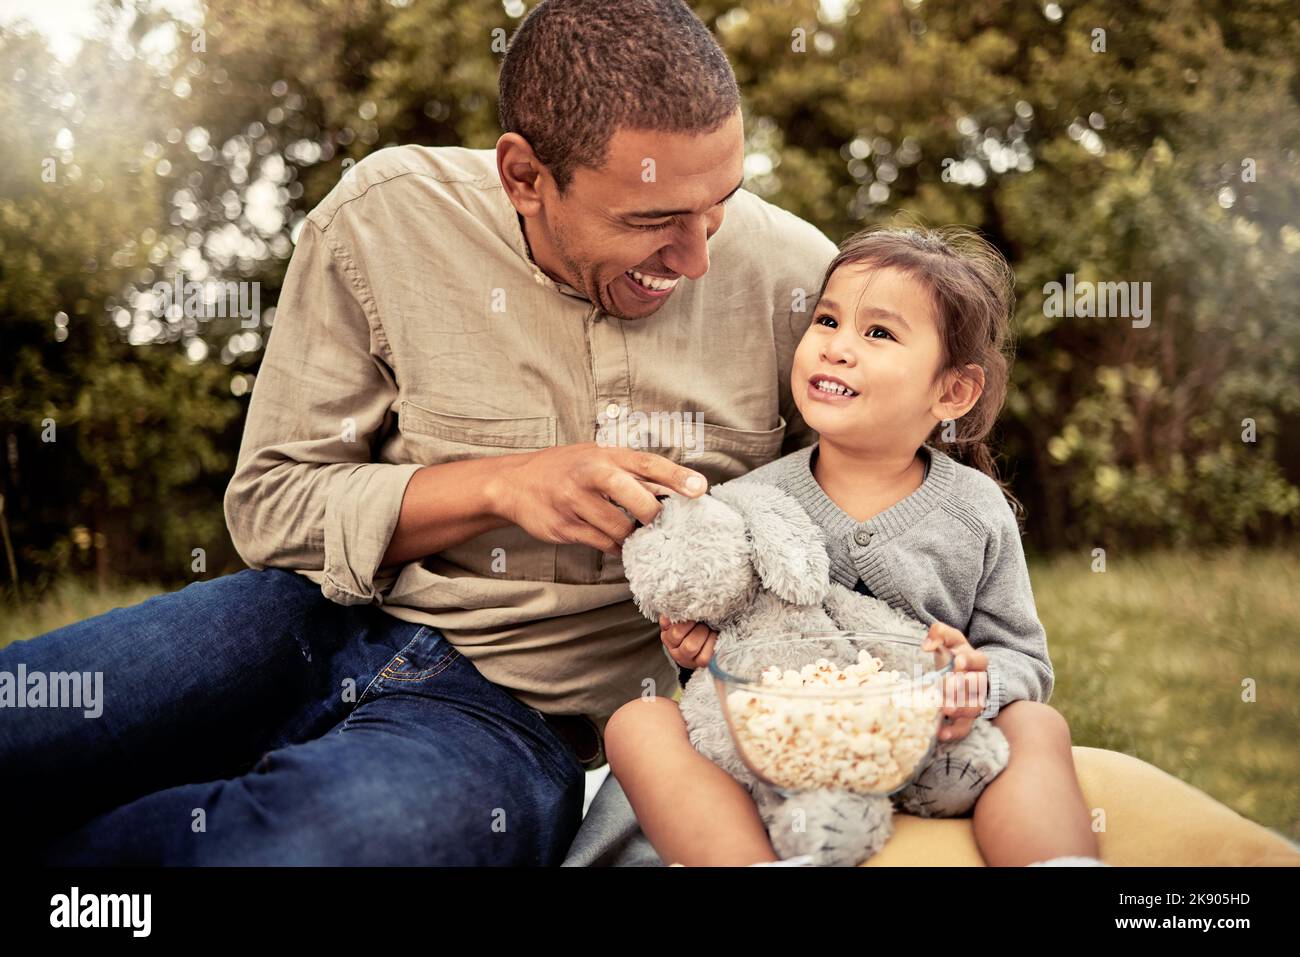 Father, girl and popcorn eating of a happy child and parent outdoor laughing with a smile. Dad, happiness and kid with food hug together with bonding Stock Photo